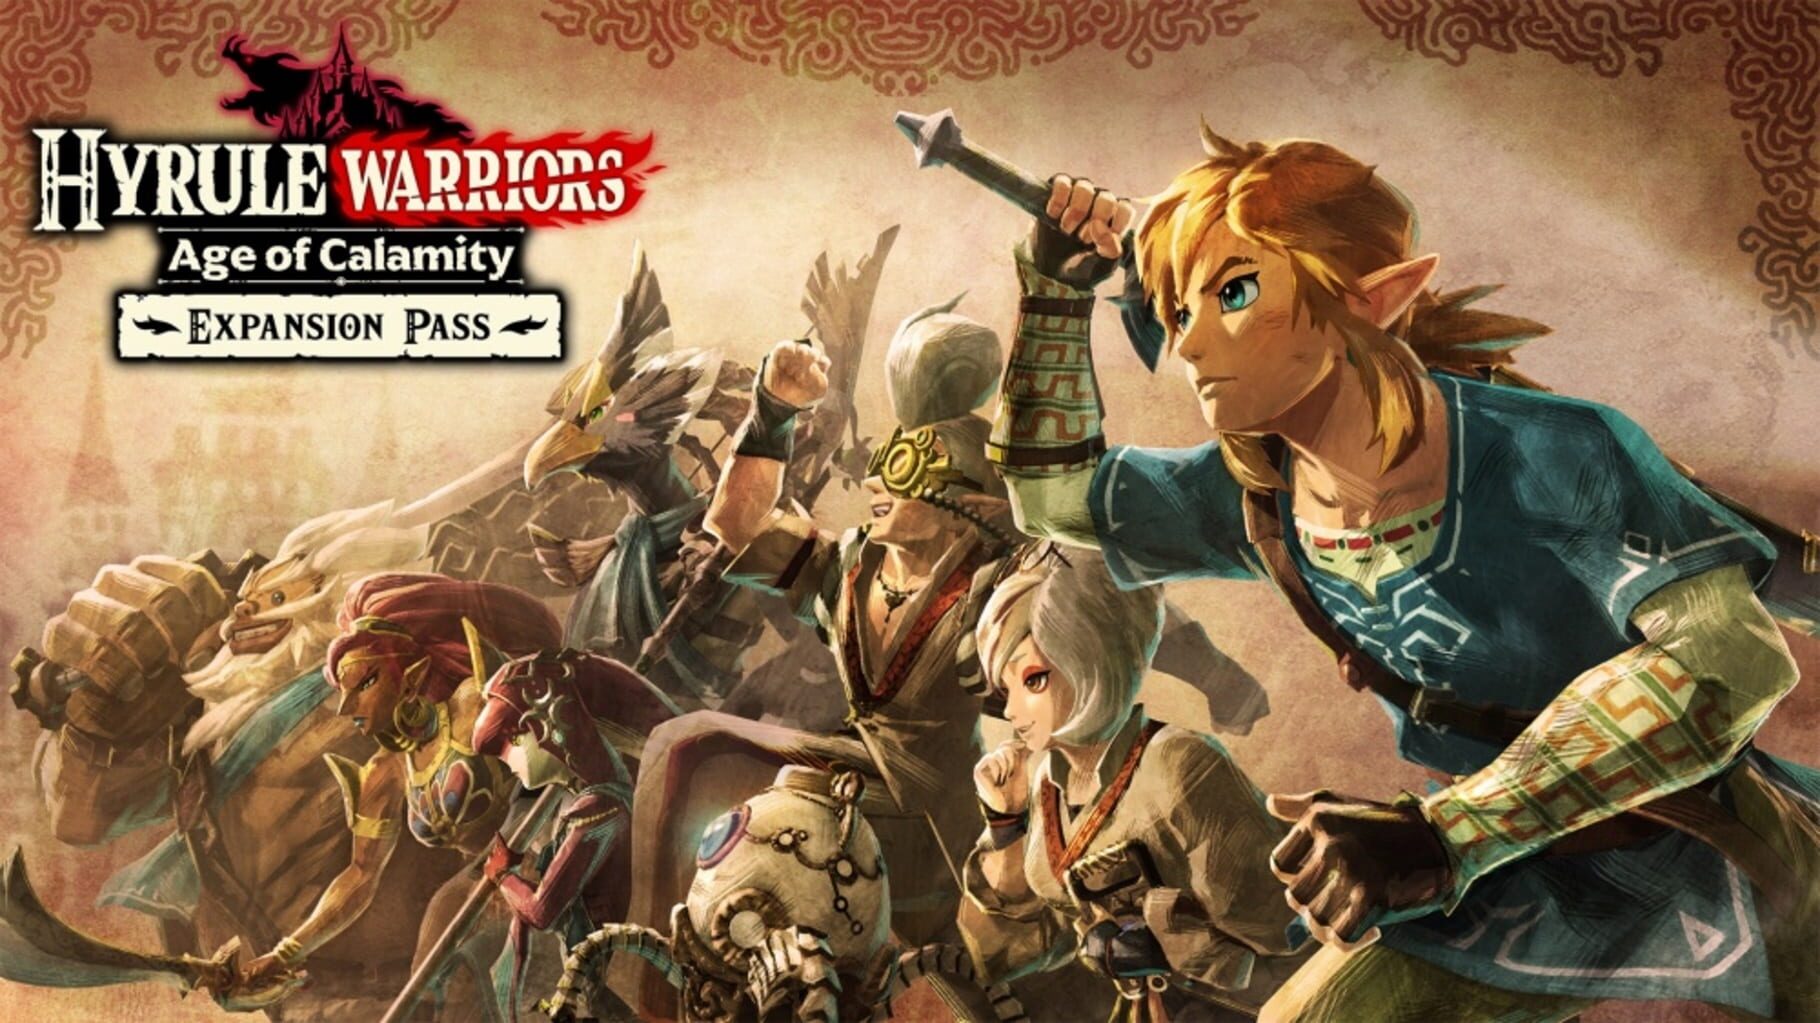 Hyrule Warriors: Age of Calamity - Expansion Pass artwork